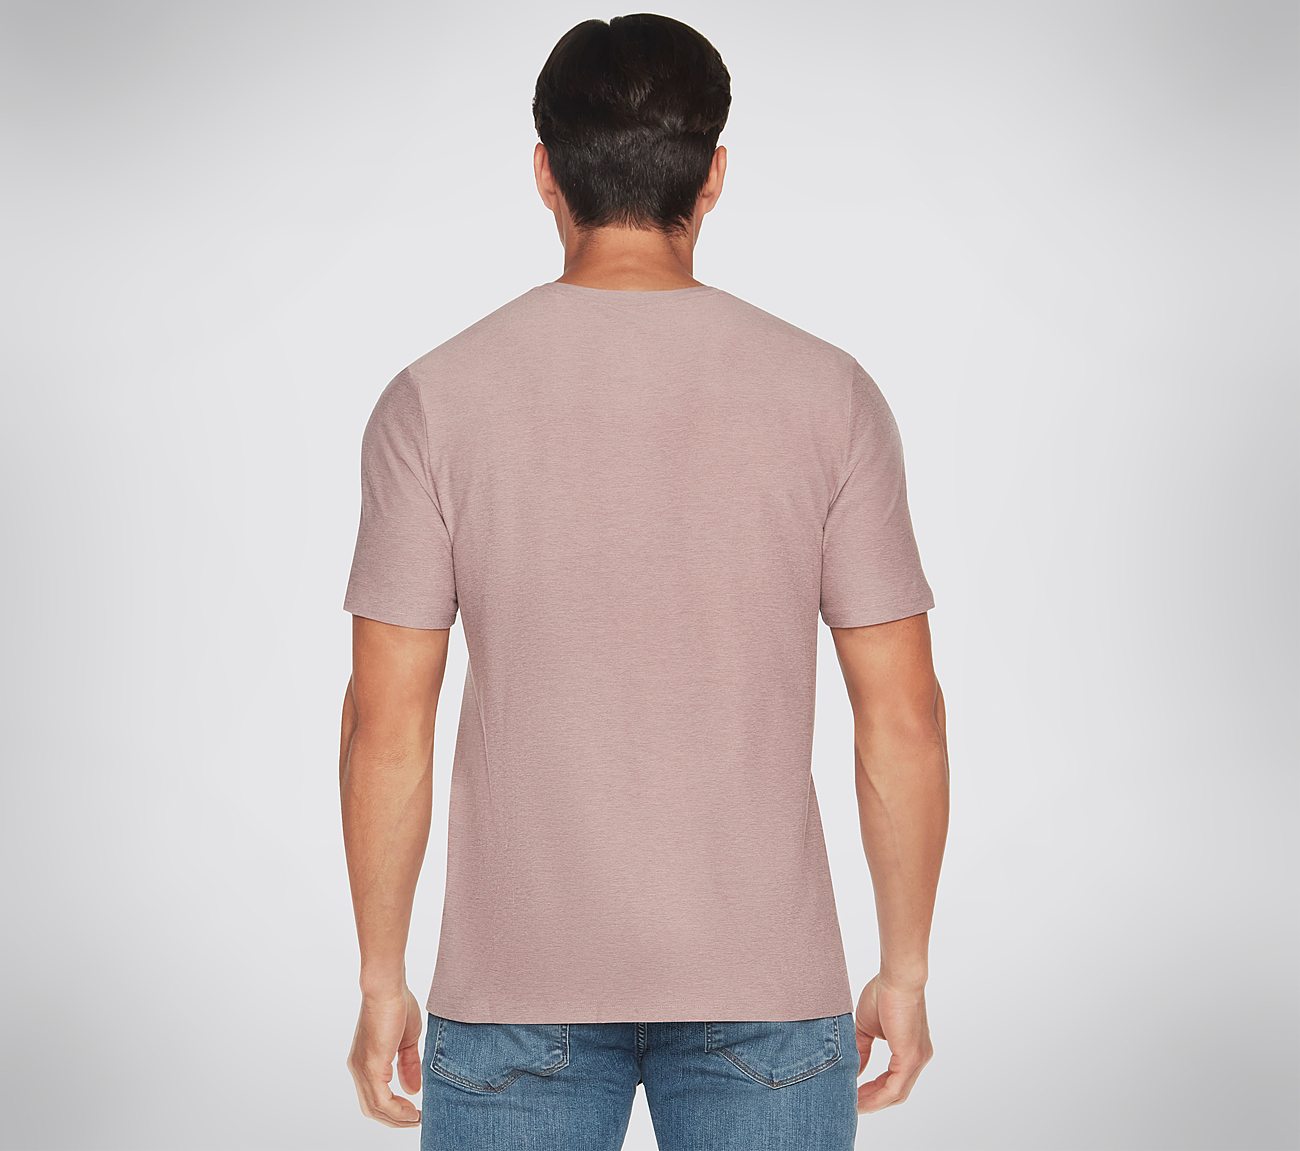 GODRI ALL DAY TEE, TAUPE/LAVENDER Apparels Top View